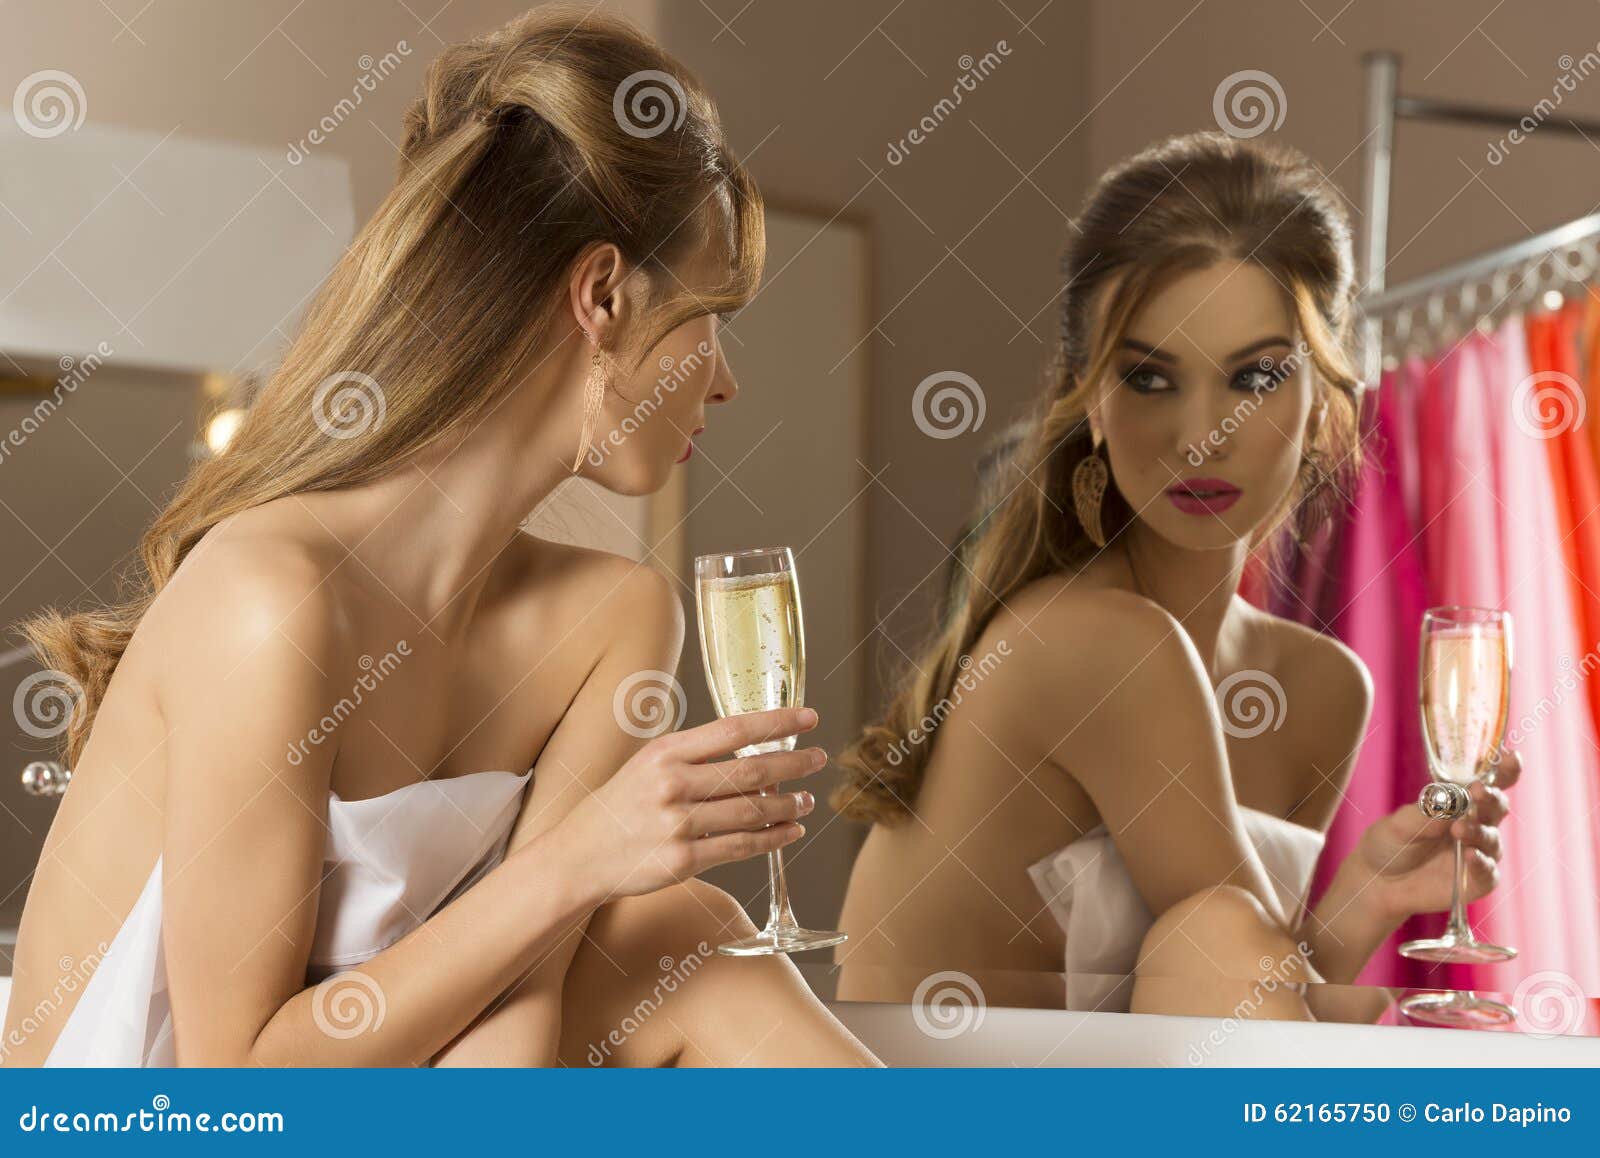 Naked Girl And Champagne